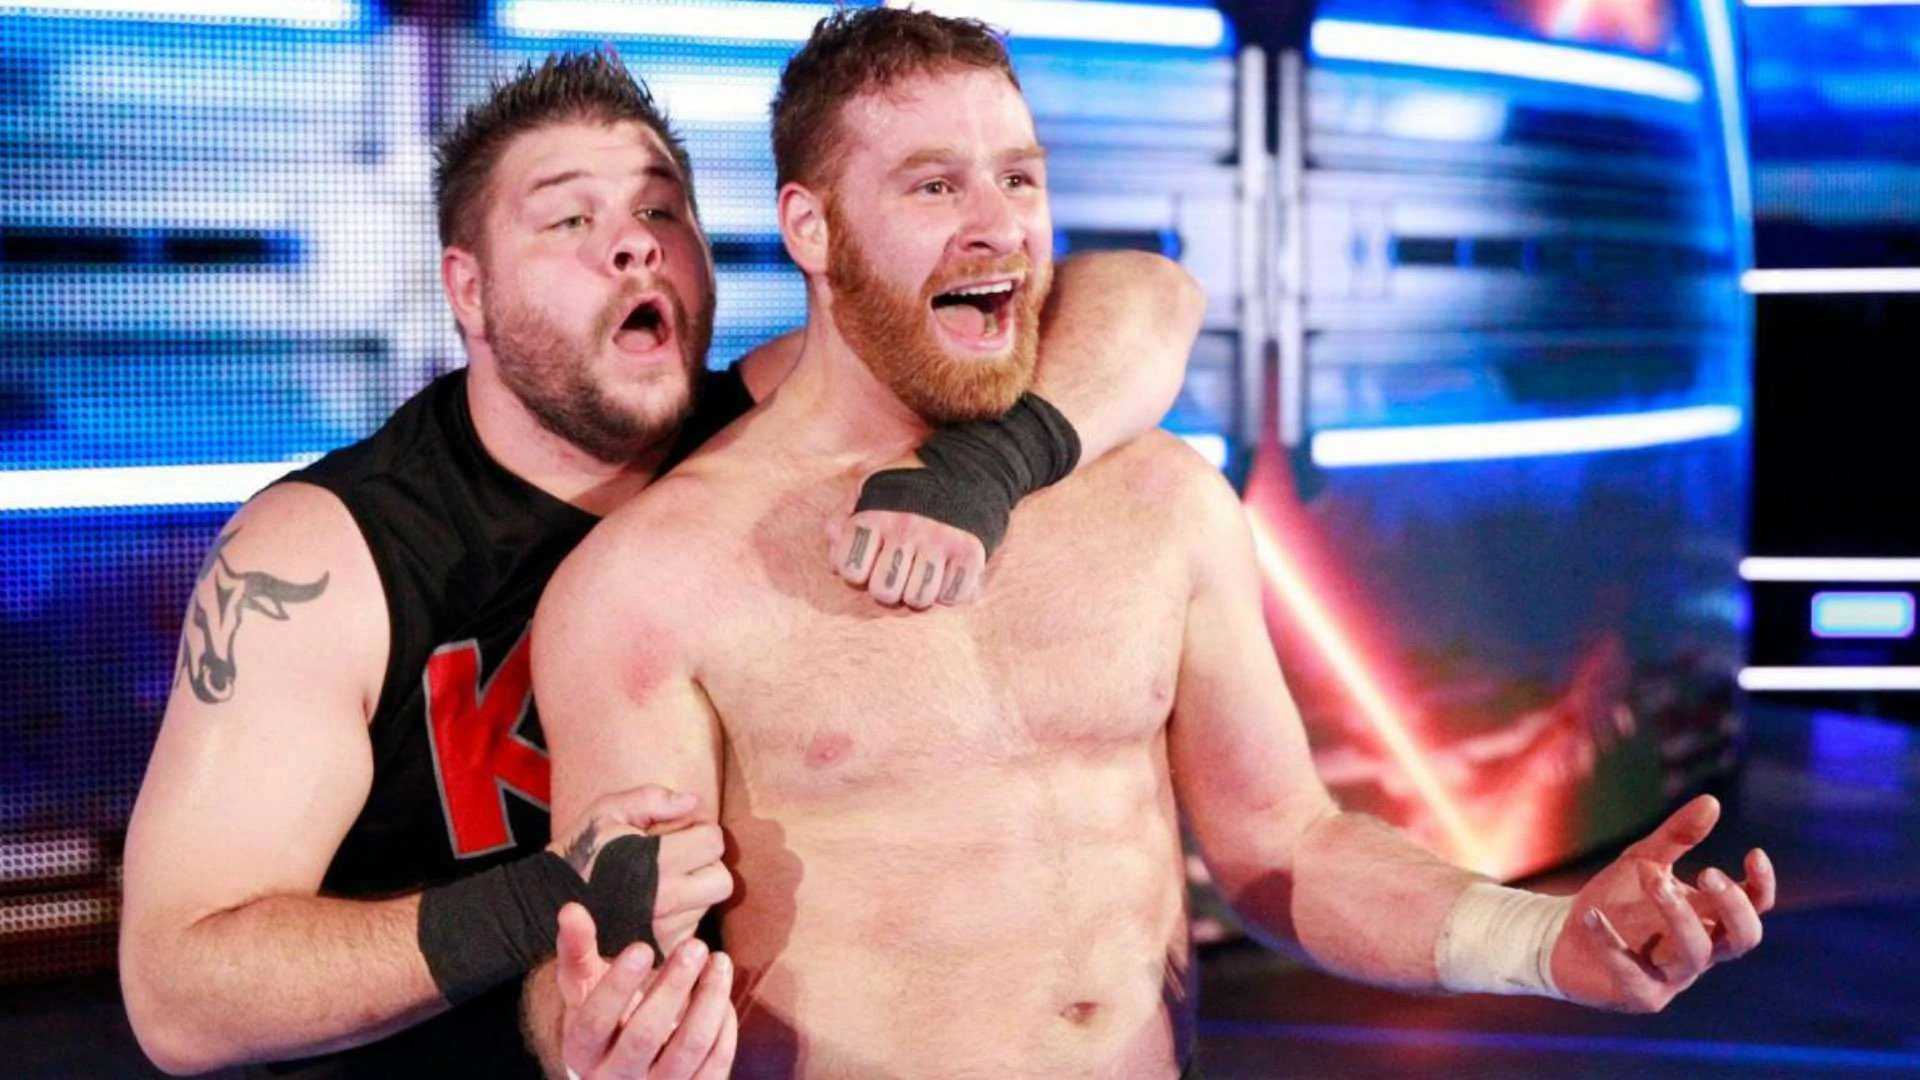 3 speculative Sami Zayn and Kevin Owens feuds for the Undisputed WWE Tag Team Championships